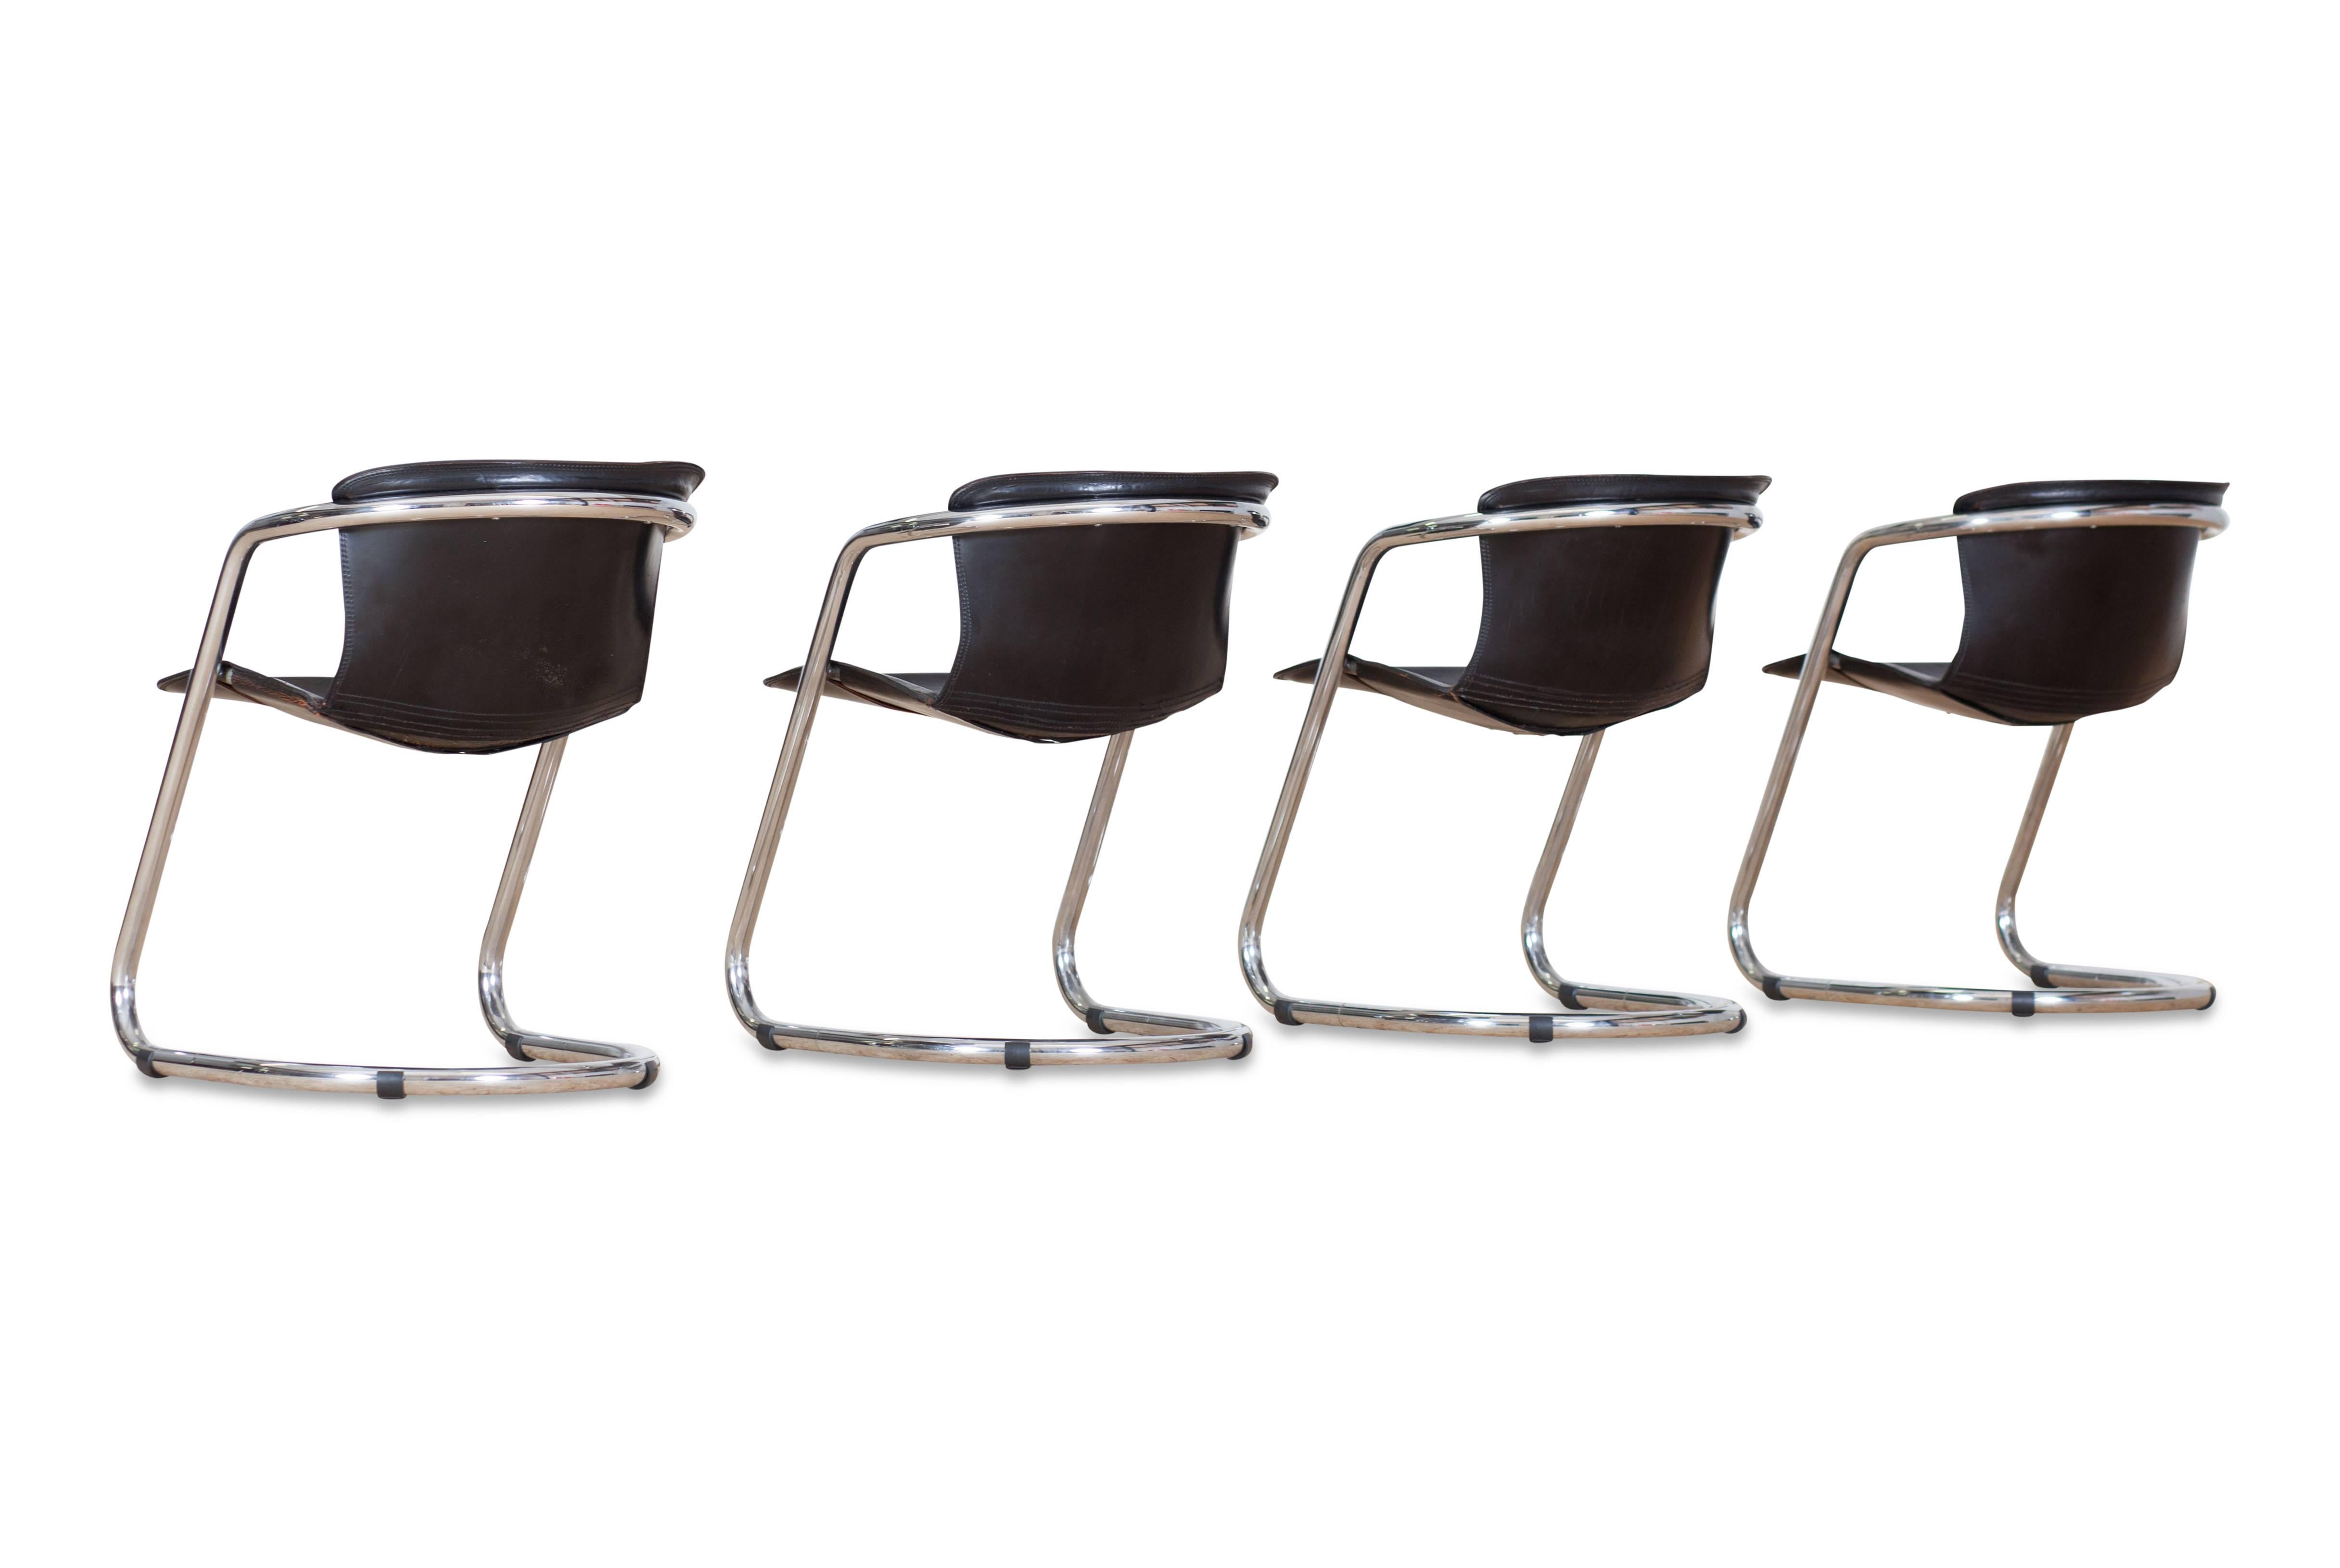 Italian Tubular Chrome Dining Chairs by Willy Rizzo for Cidue, Italy, 1970s